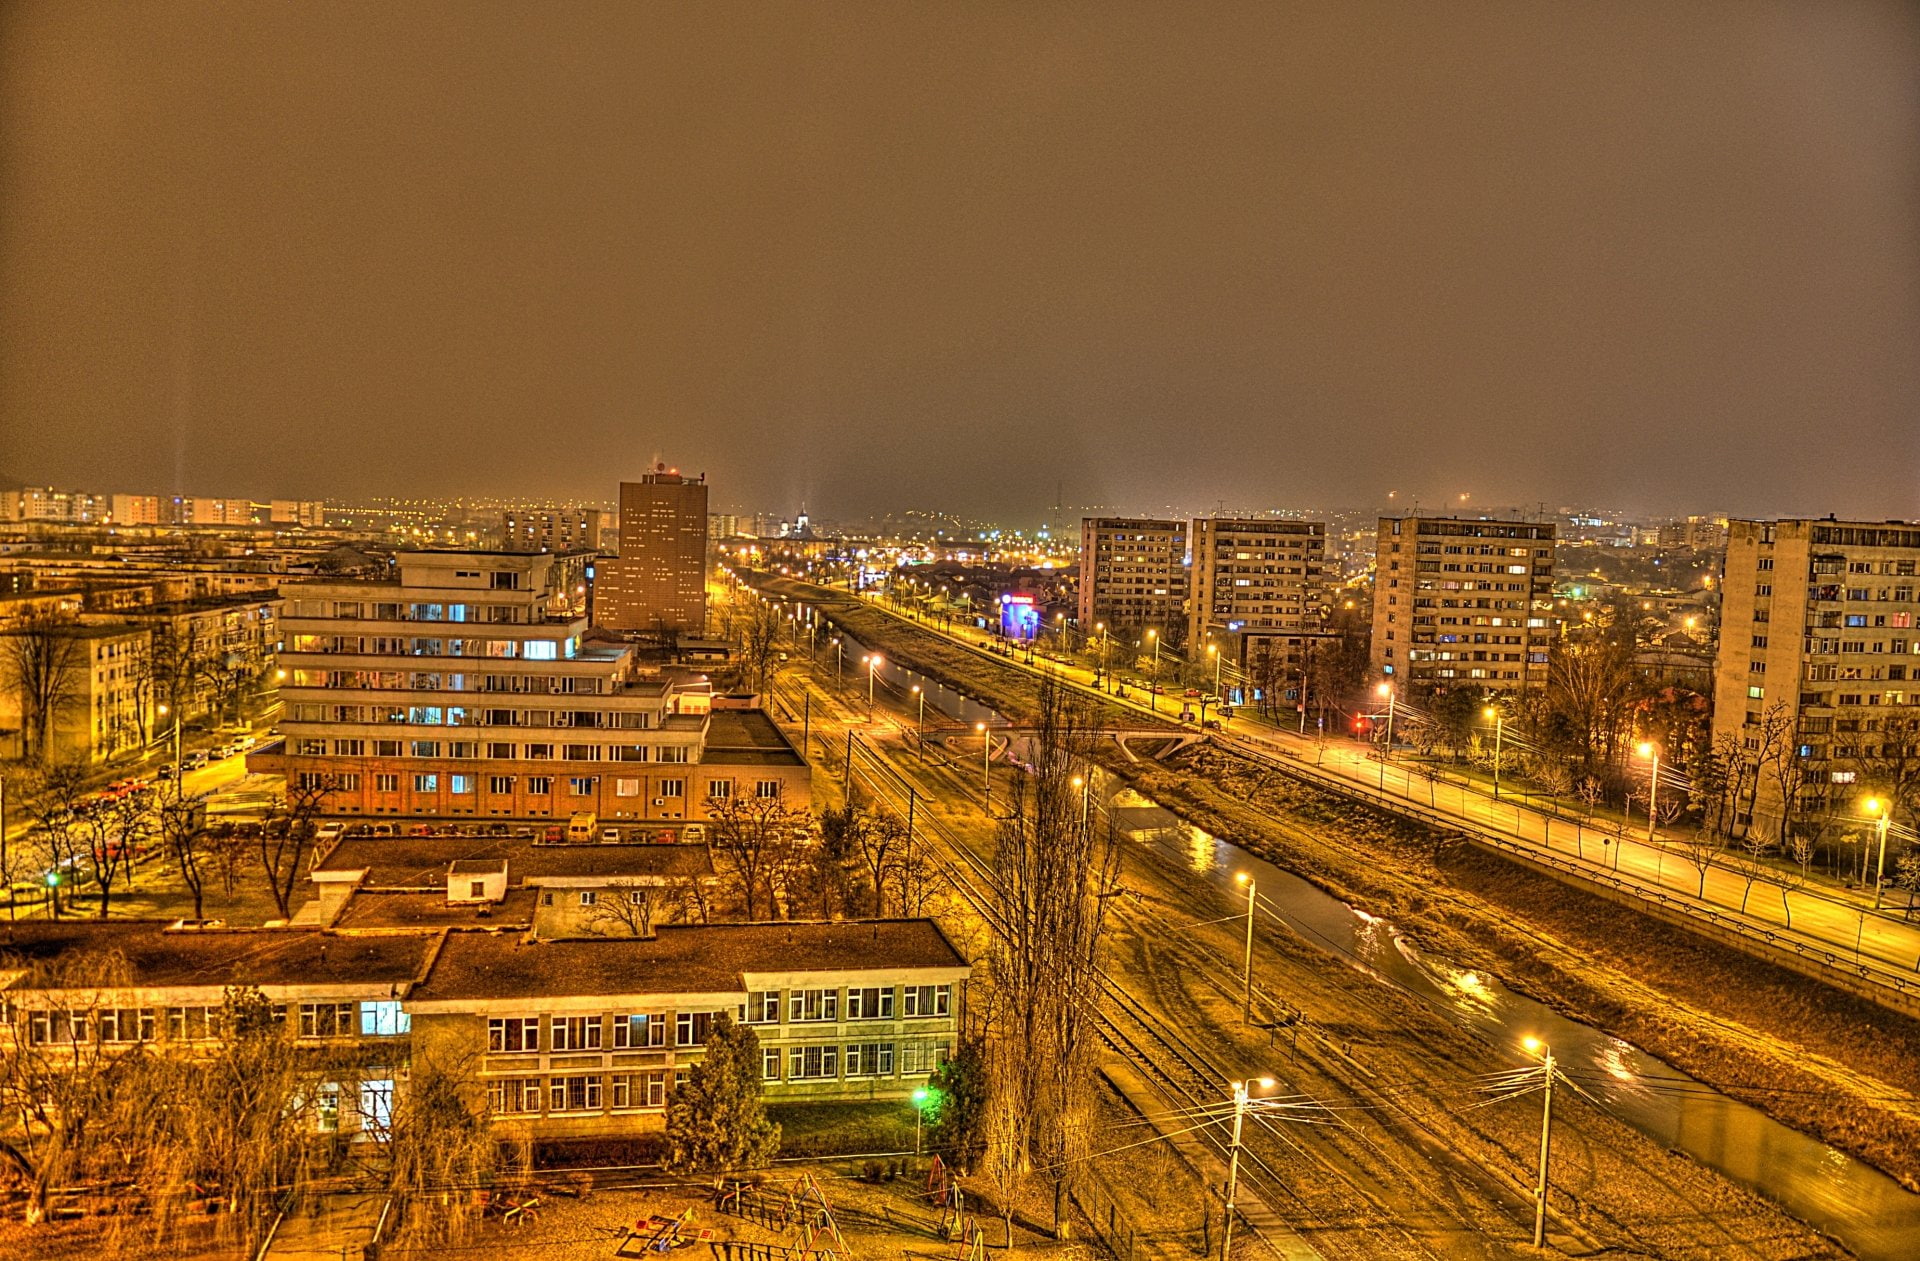 Photography, HDR, Bahlui, City, Iasi